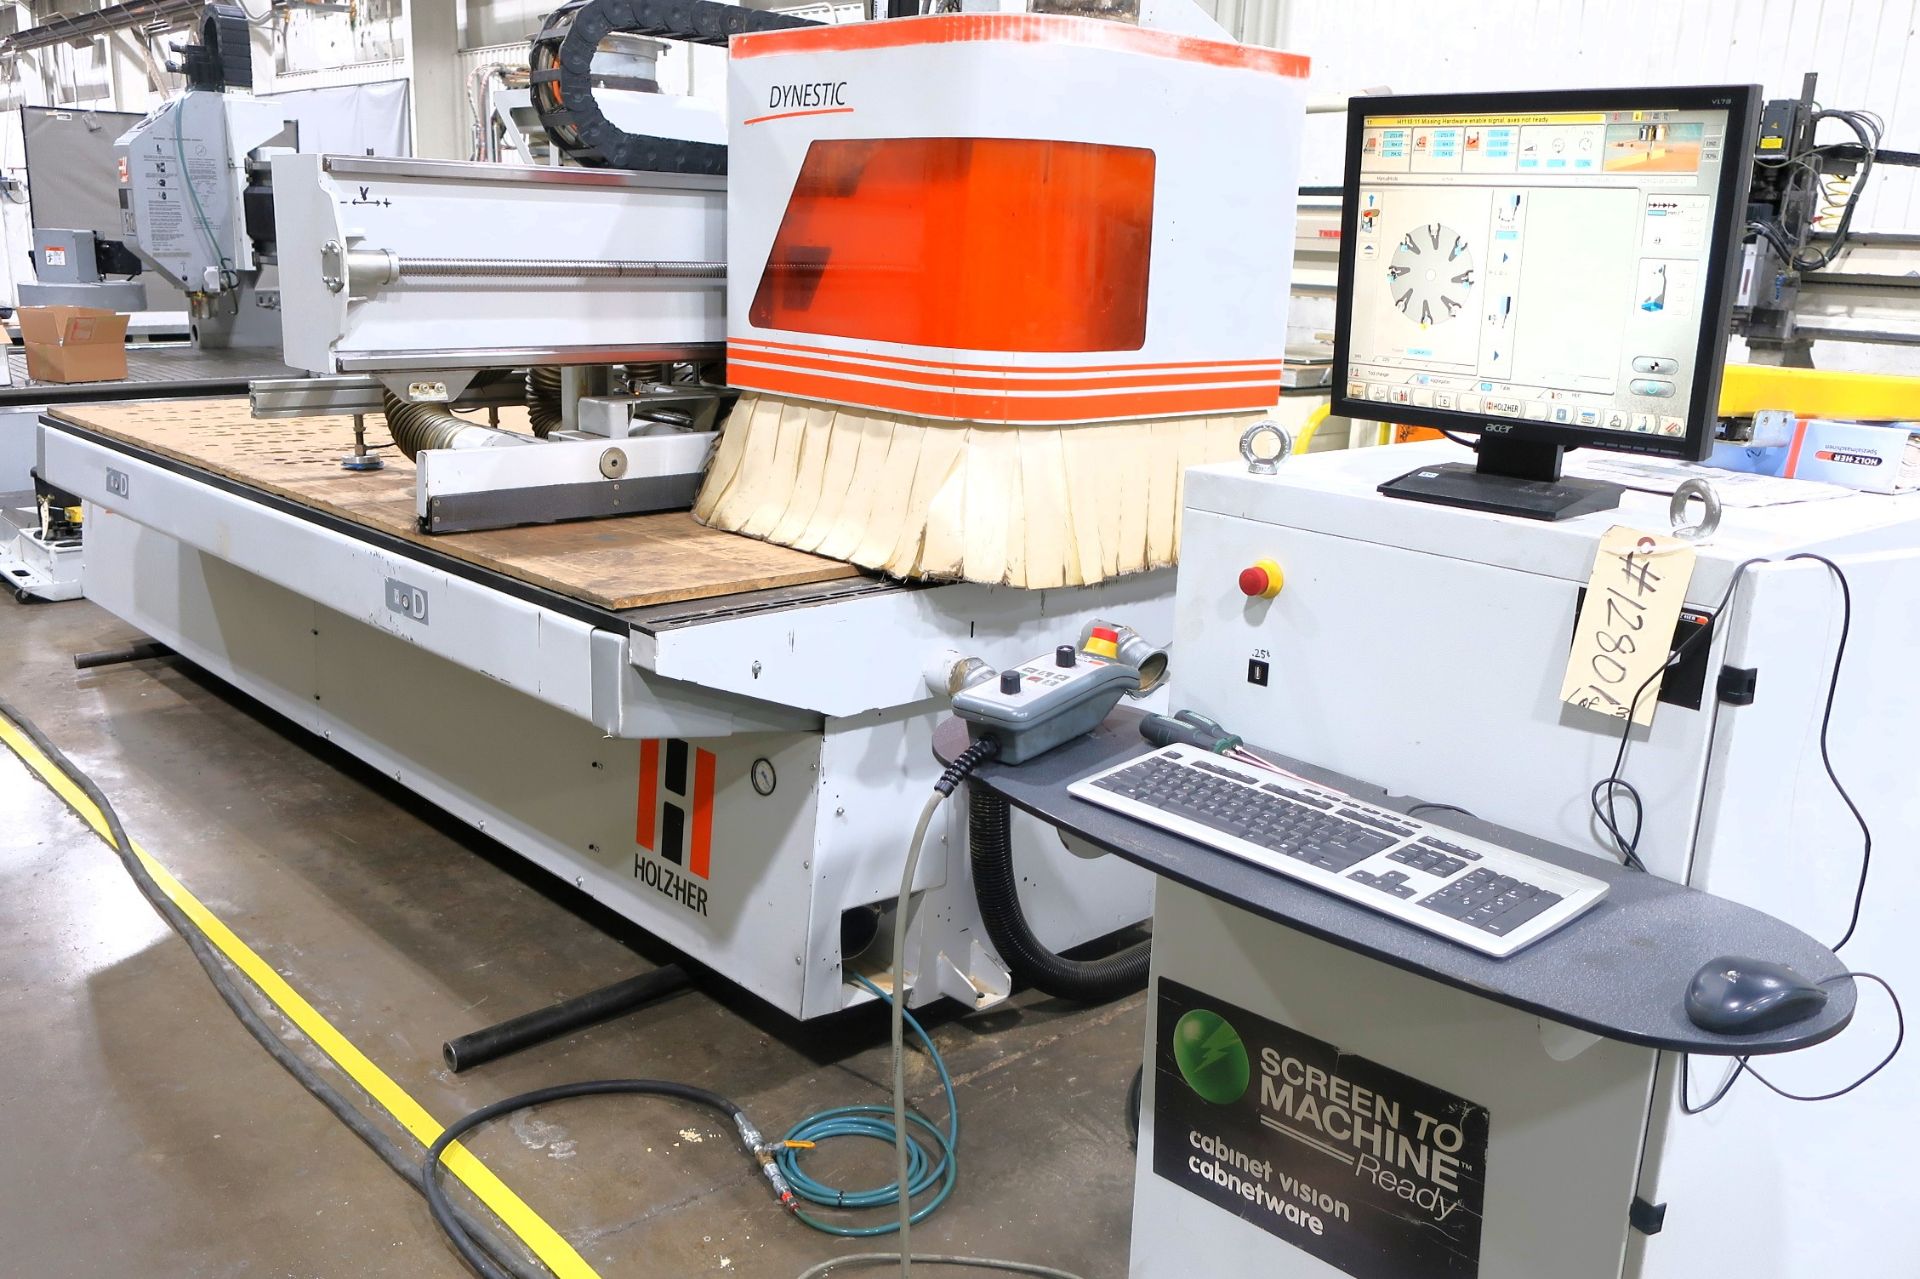 5' X 10' HOLZHER MODEL DYNESTIC 7516 CNC ROUTER, S/N 27/1-102 5017084, NEW 2011